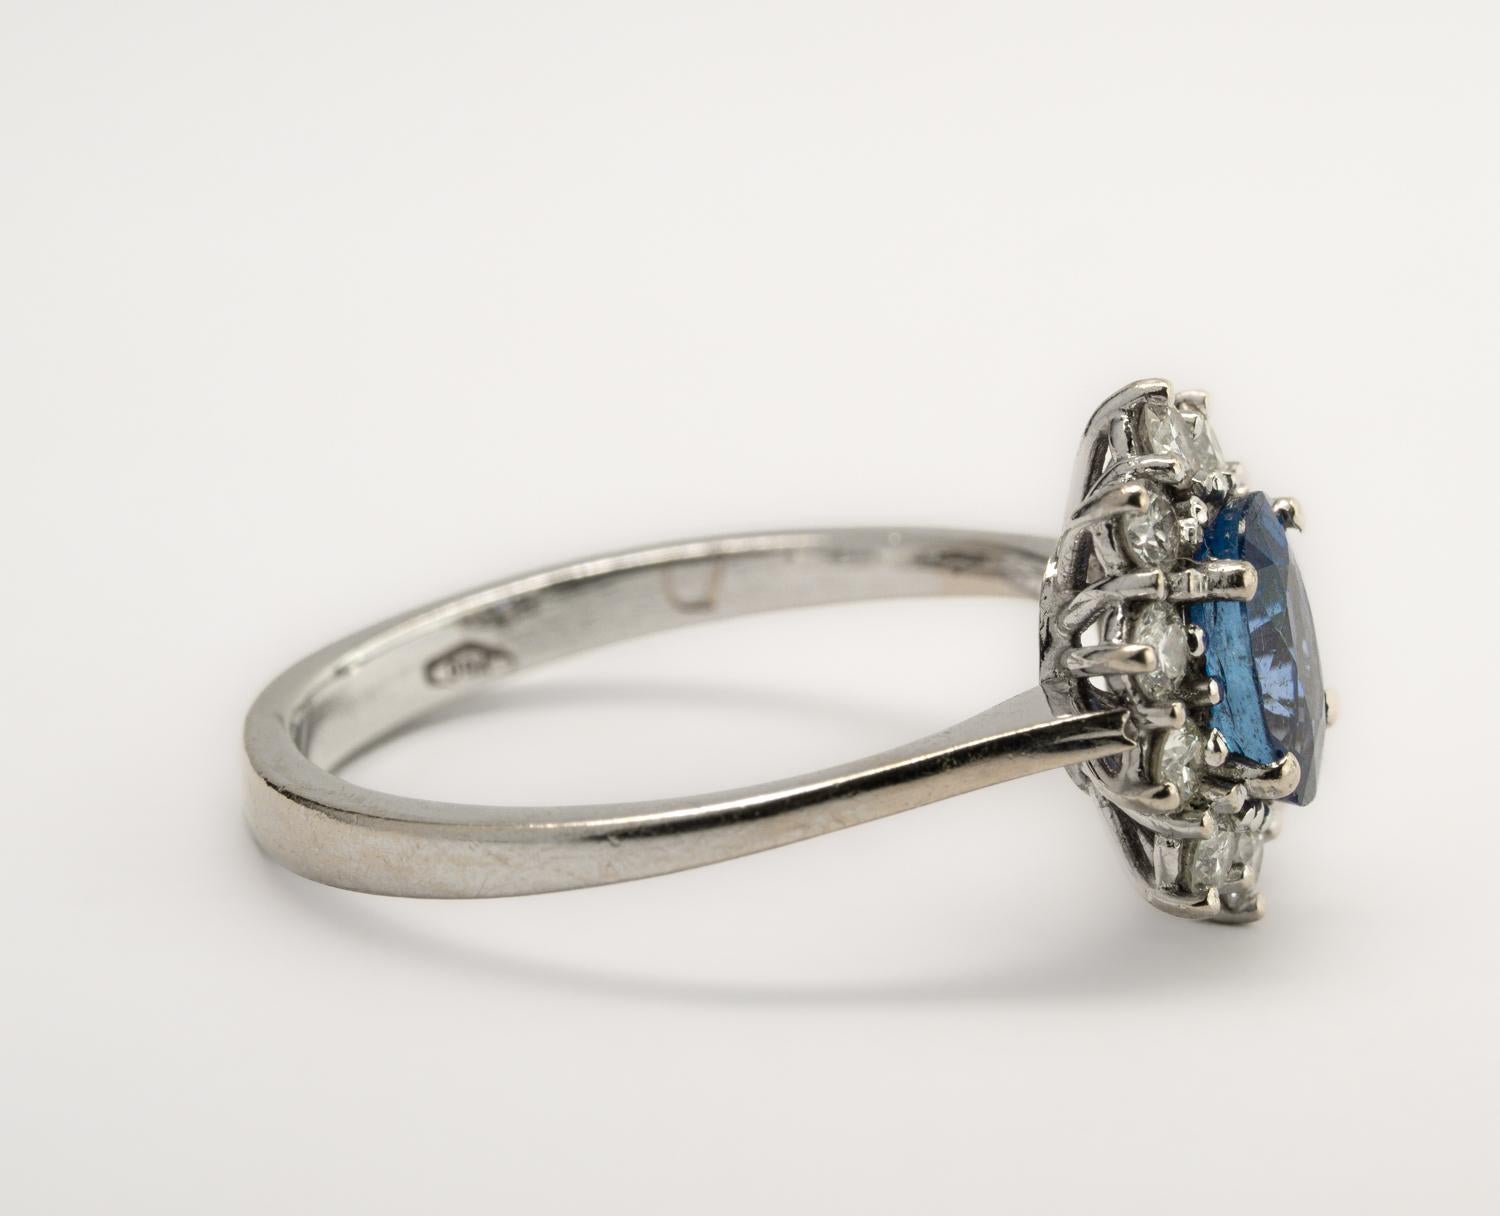 Women's Vintage Oval Sapphire and Diamond Halo Ring, Vintage Sapphire Engagement Ring